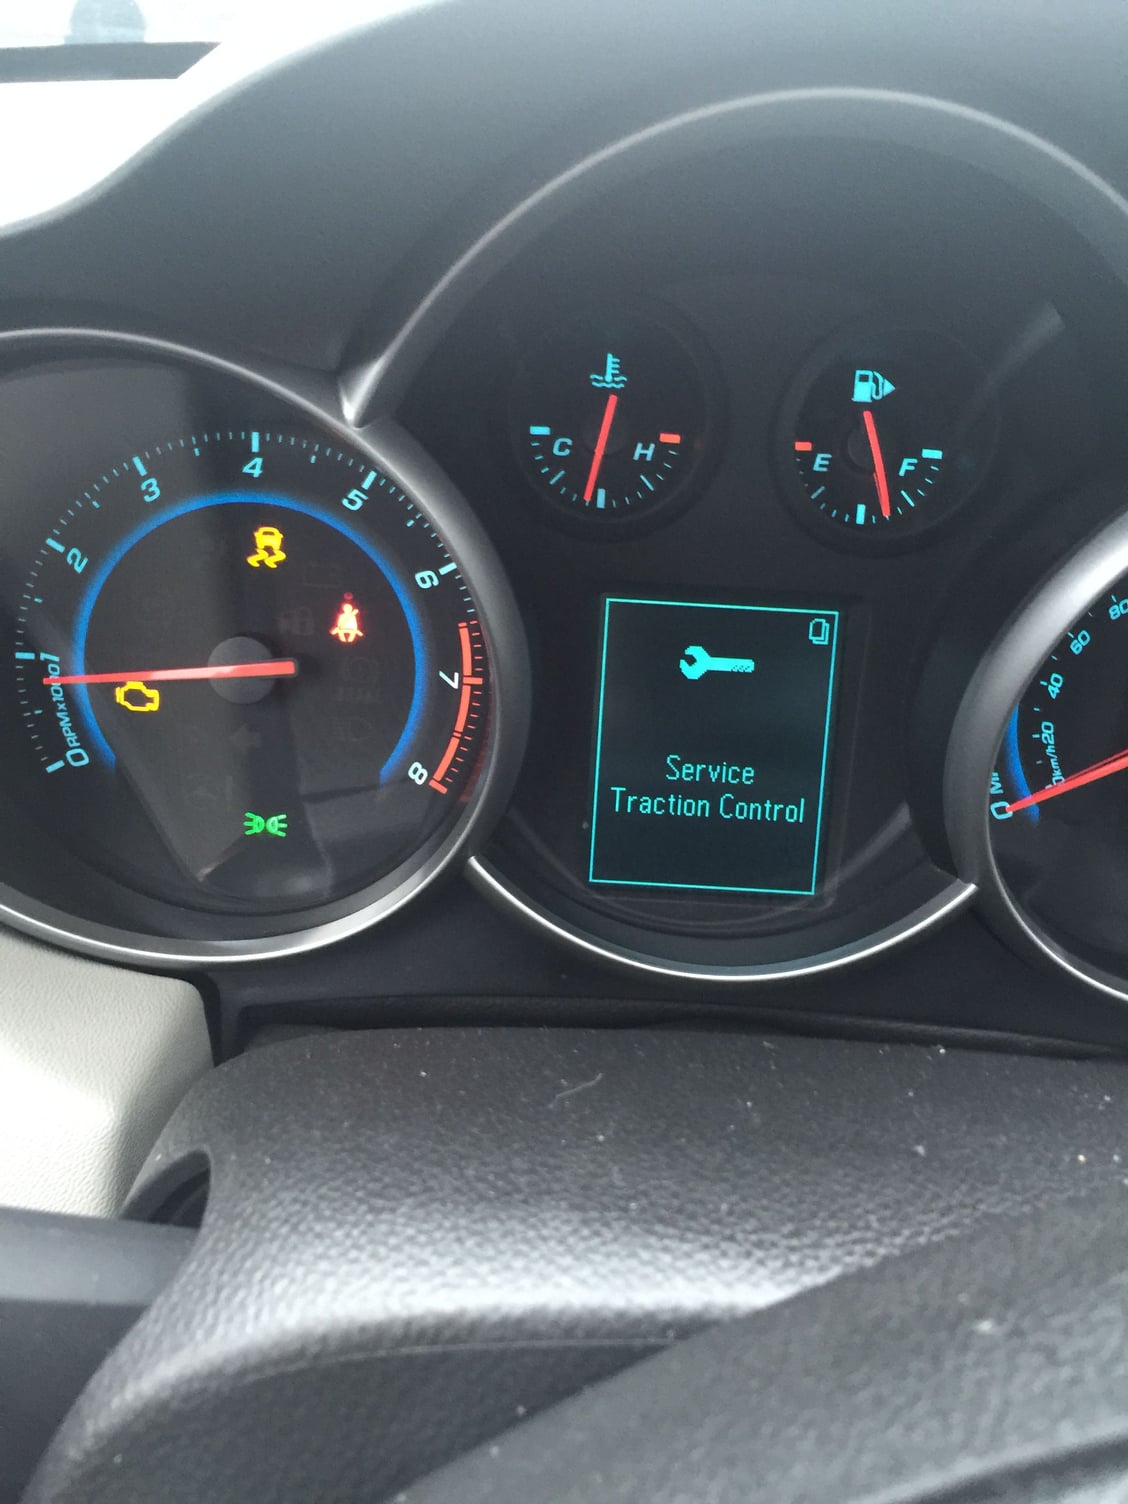 service traction control chevy cruze cost